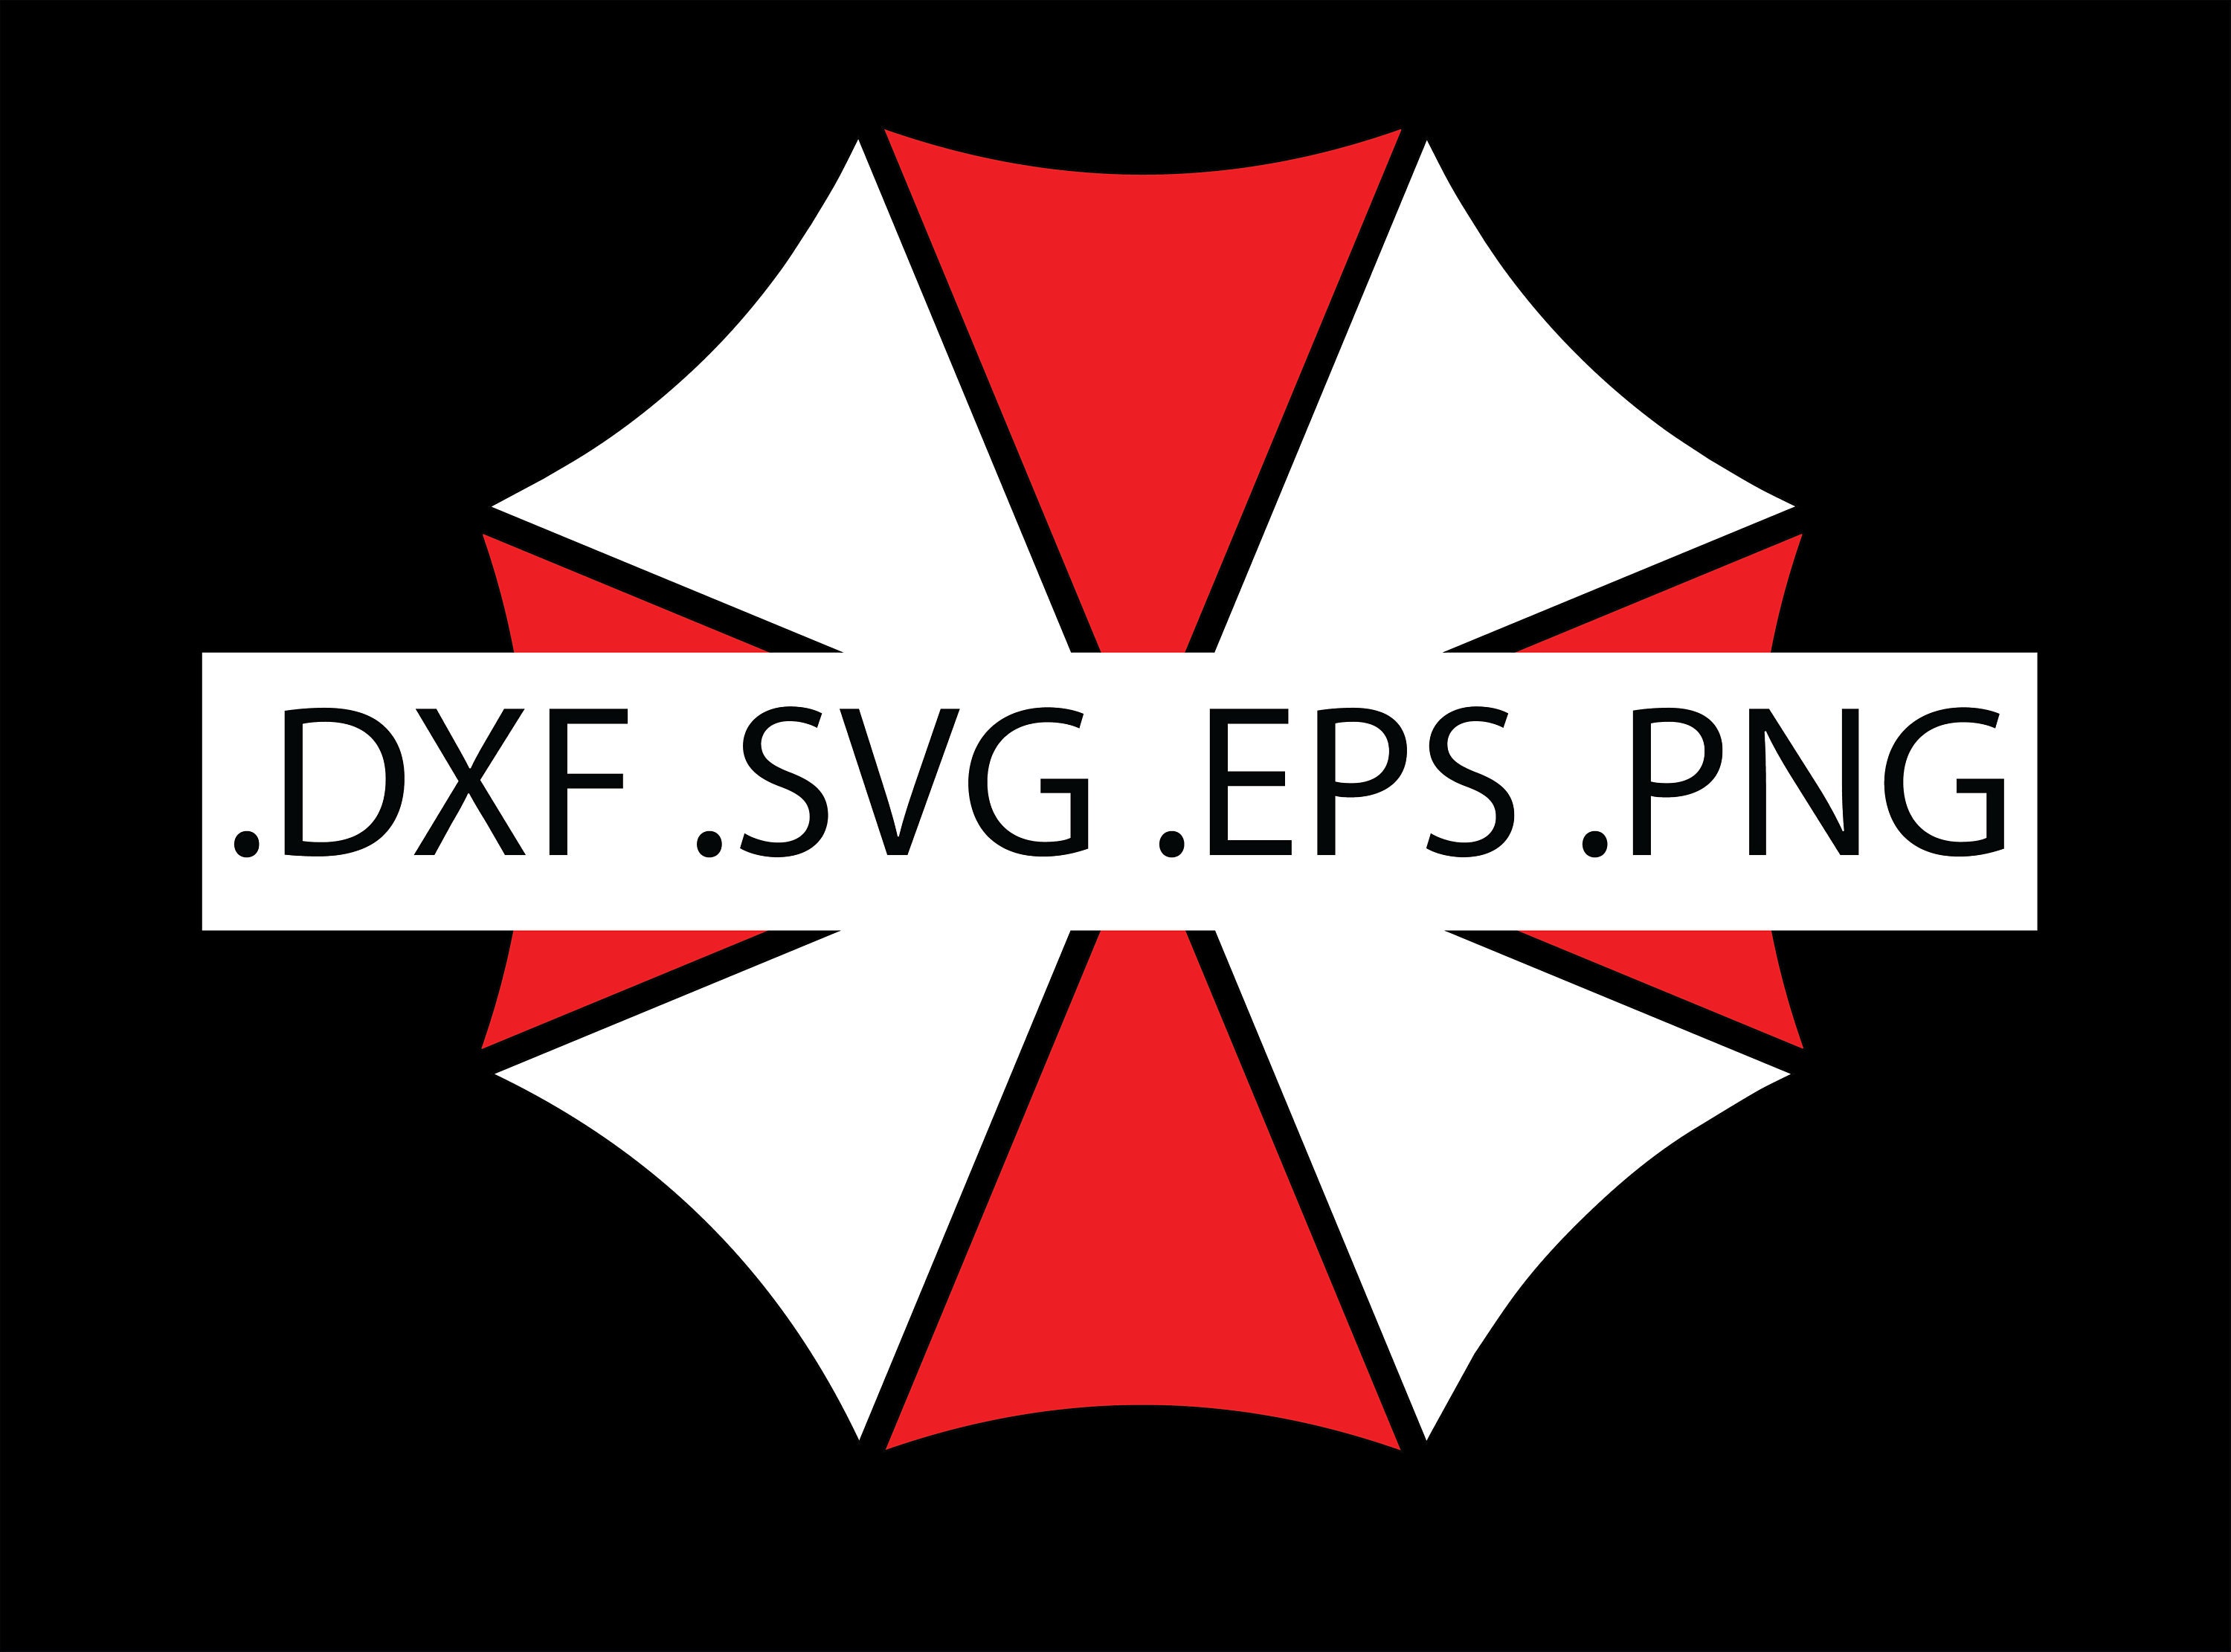 Buy Personalised Umbrella Corporation Access ID Card Resident Evil Gift  Online in India 